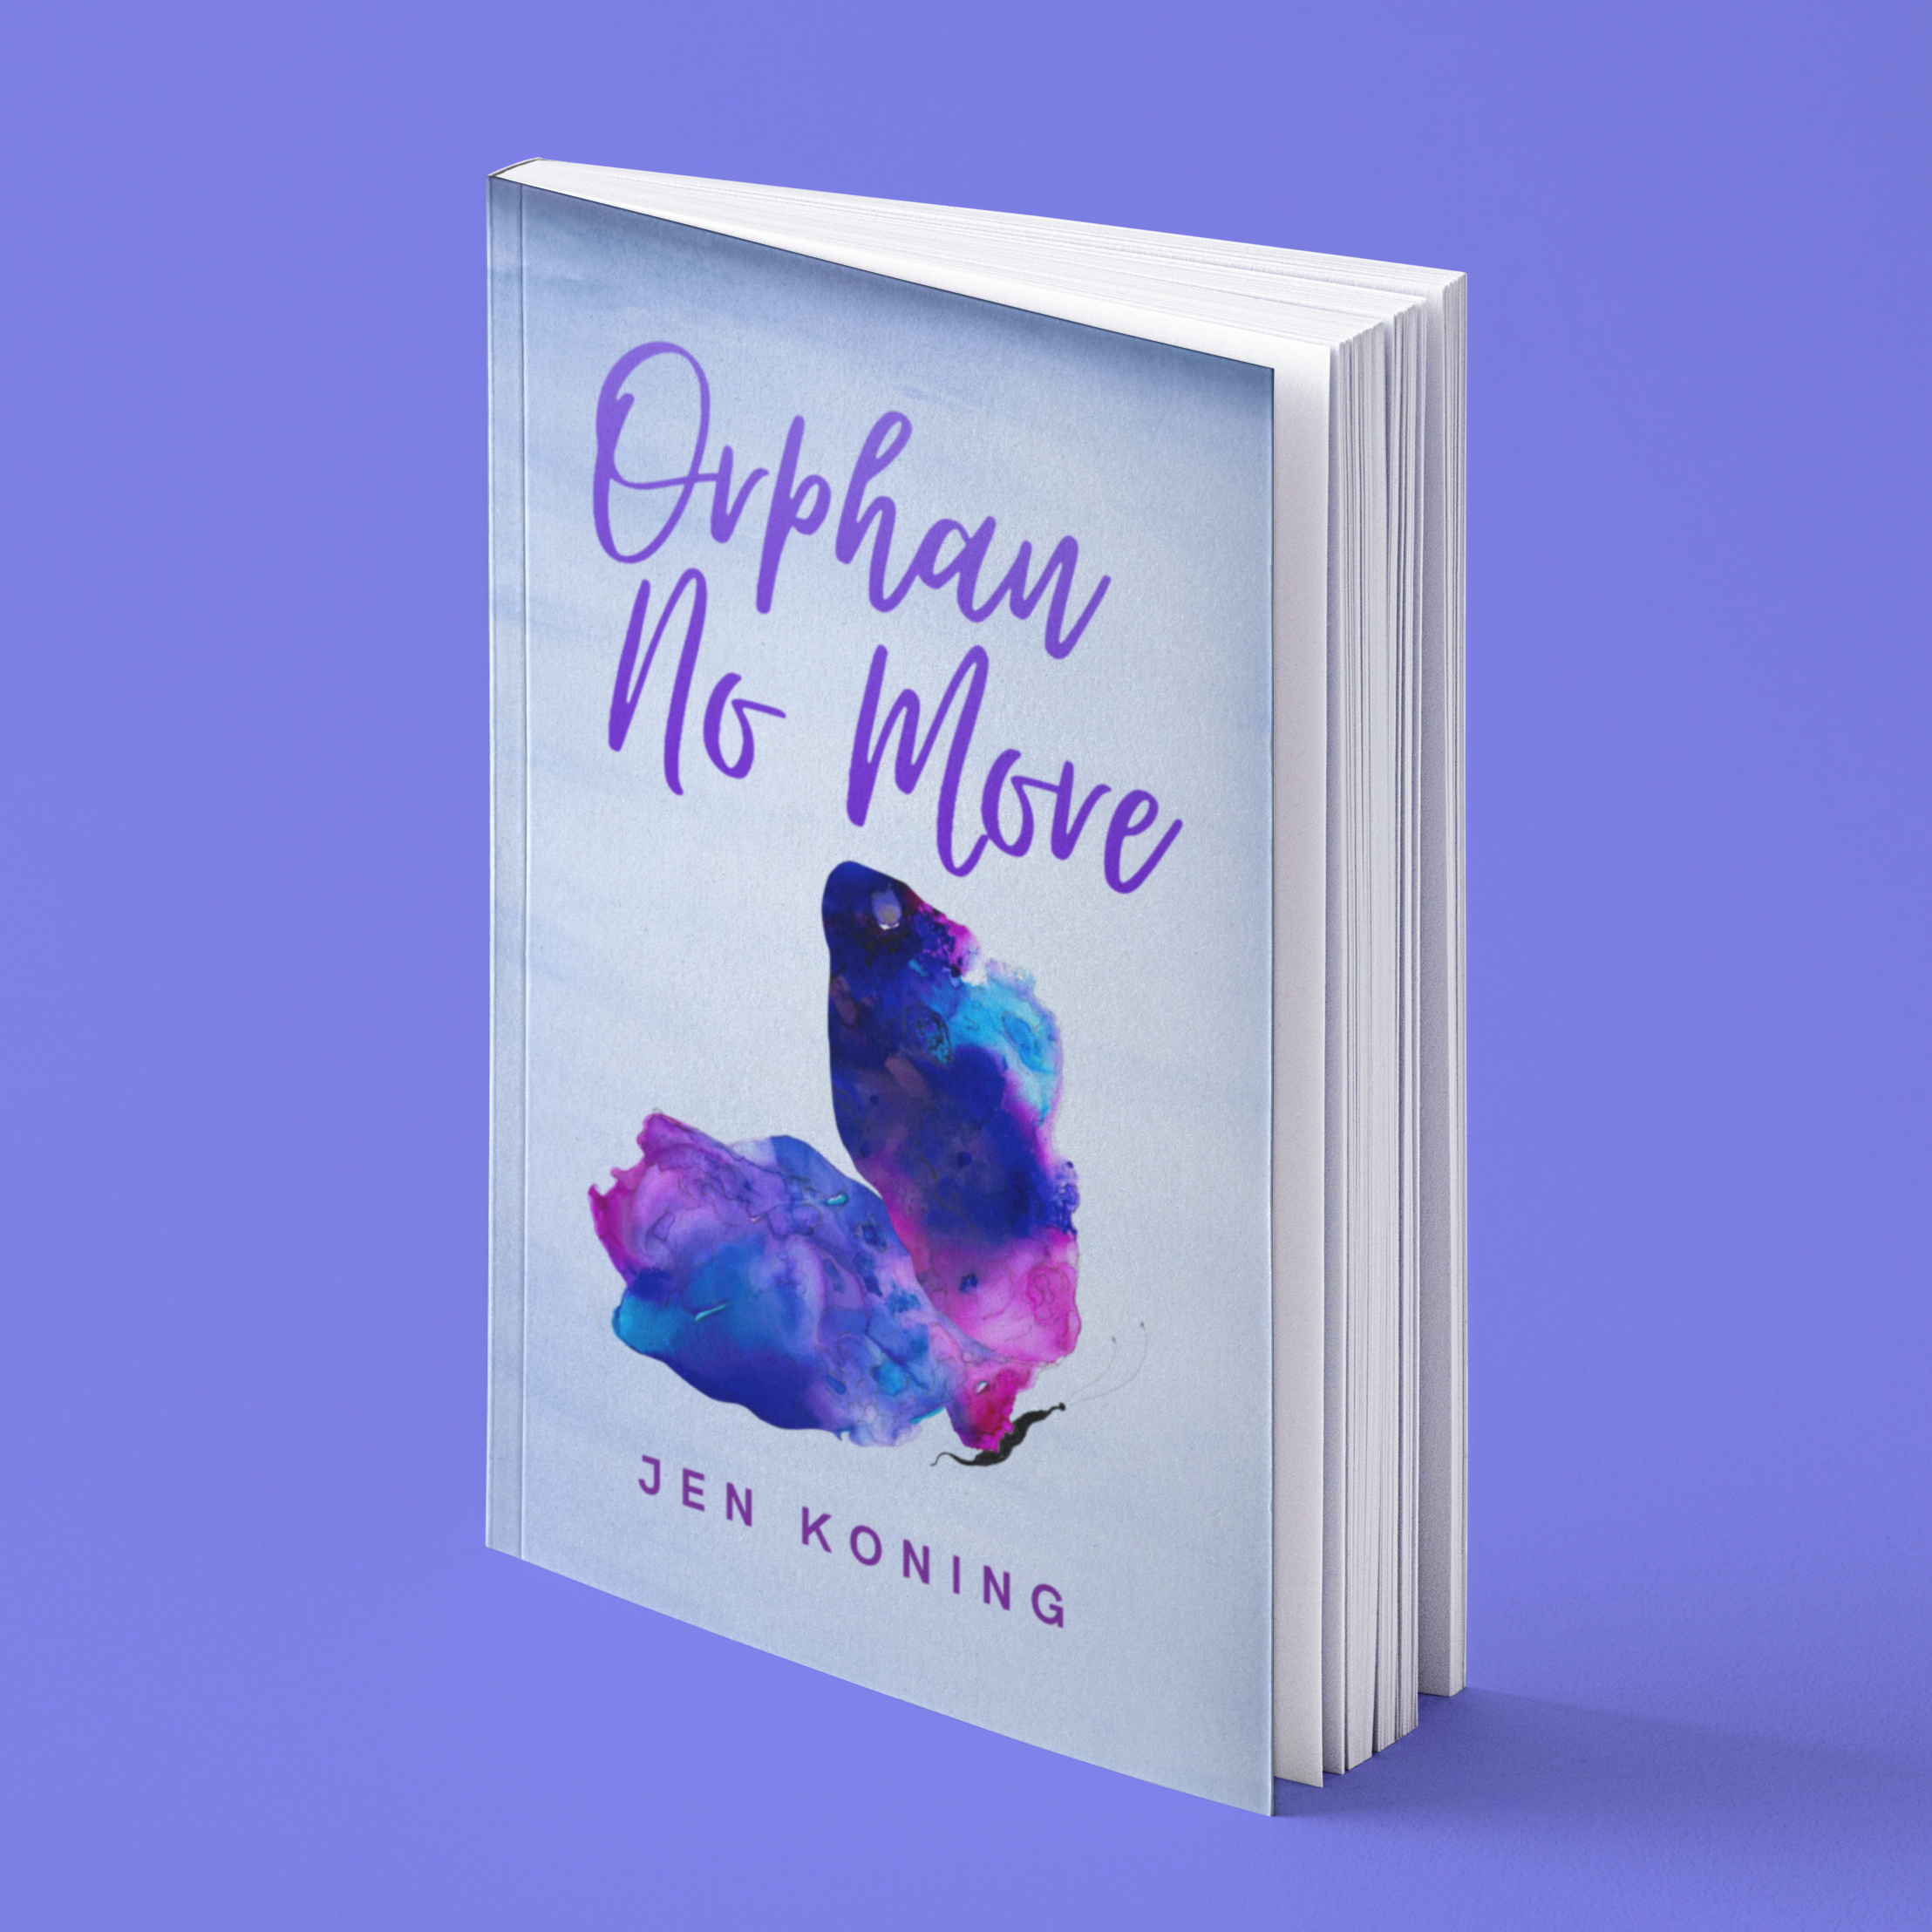 Jen Koning A survivor of different Abuses and shares her abandonment story in her new book "Orphan No More"